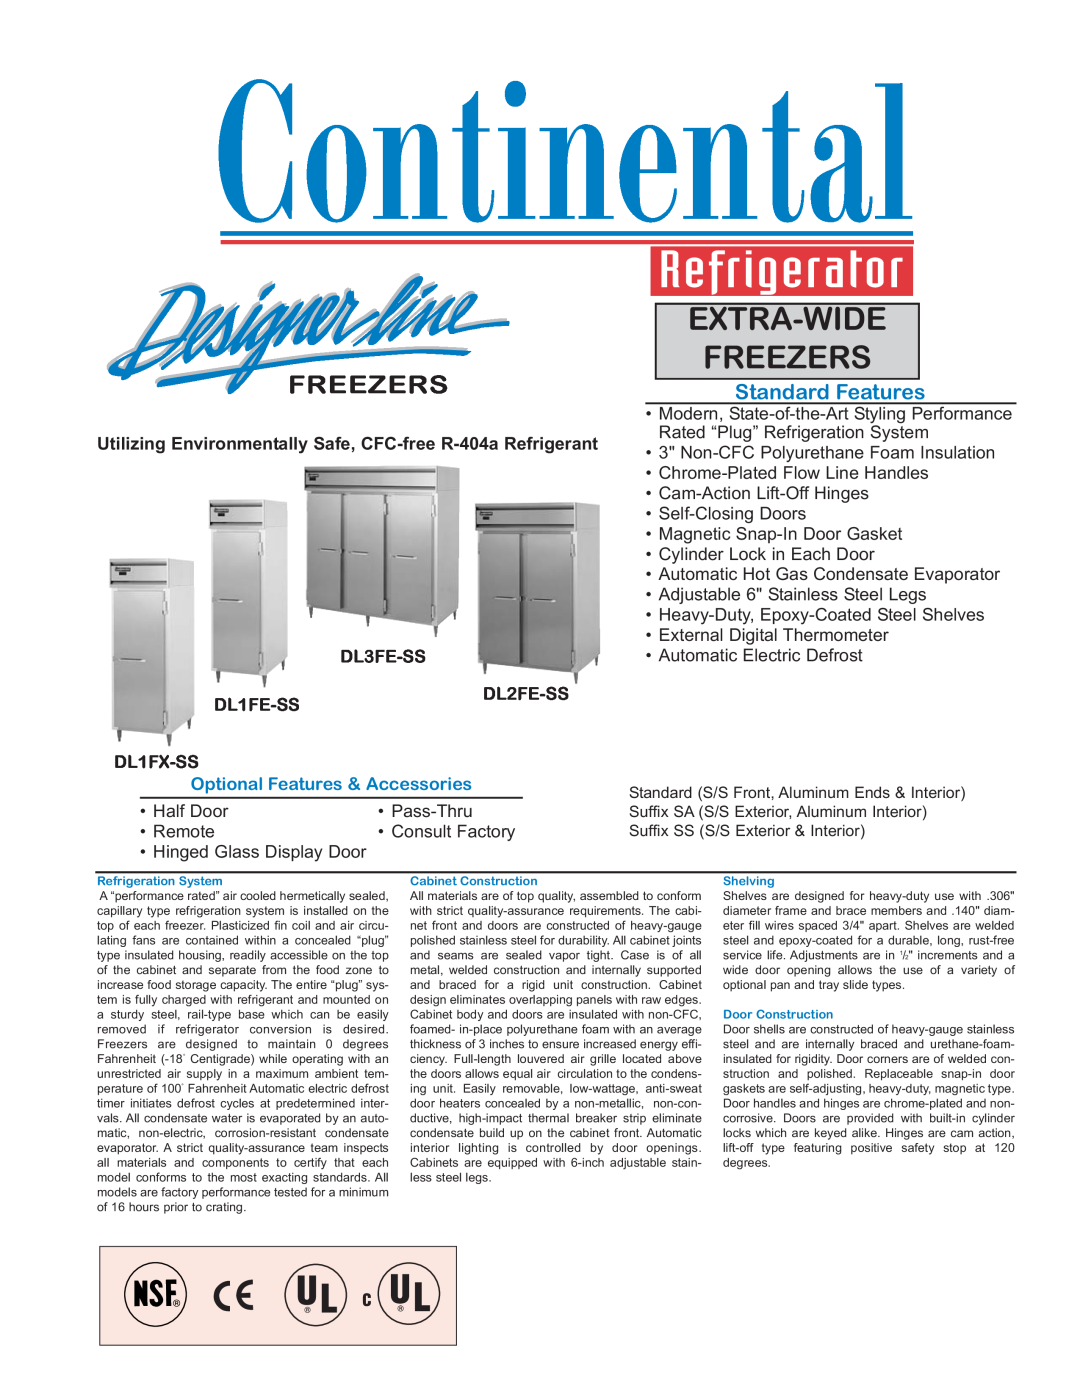 Continental Refrigerator DL2FE-SS manual Extra-Wide Freezers, Standard Features, DL3FE-SS, DL1FE-SS, DL1FX-SS 